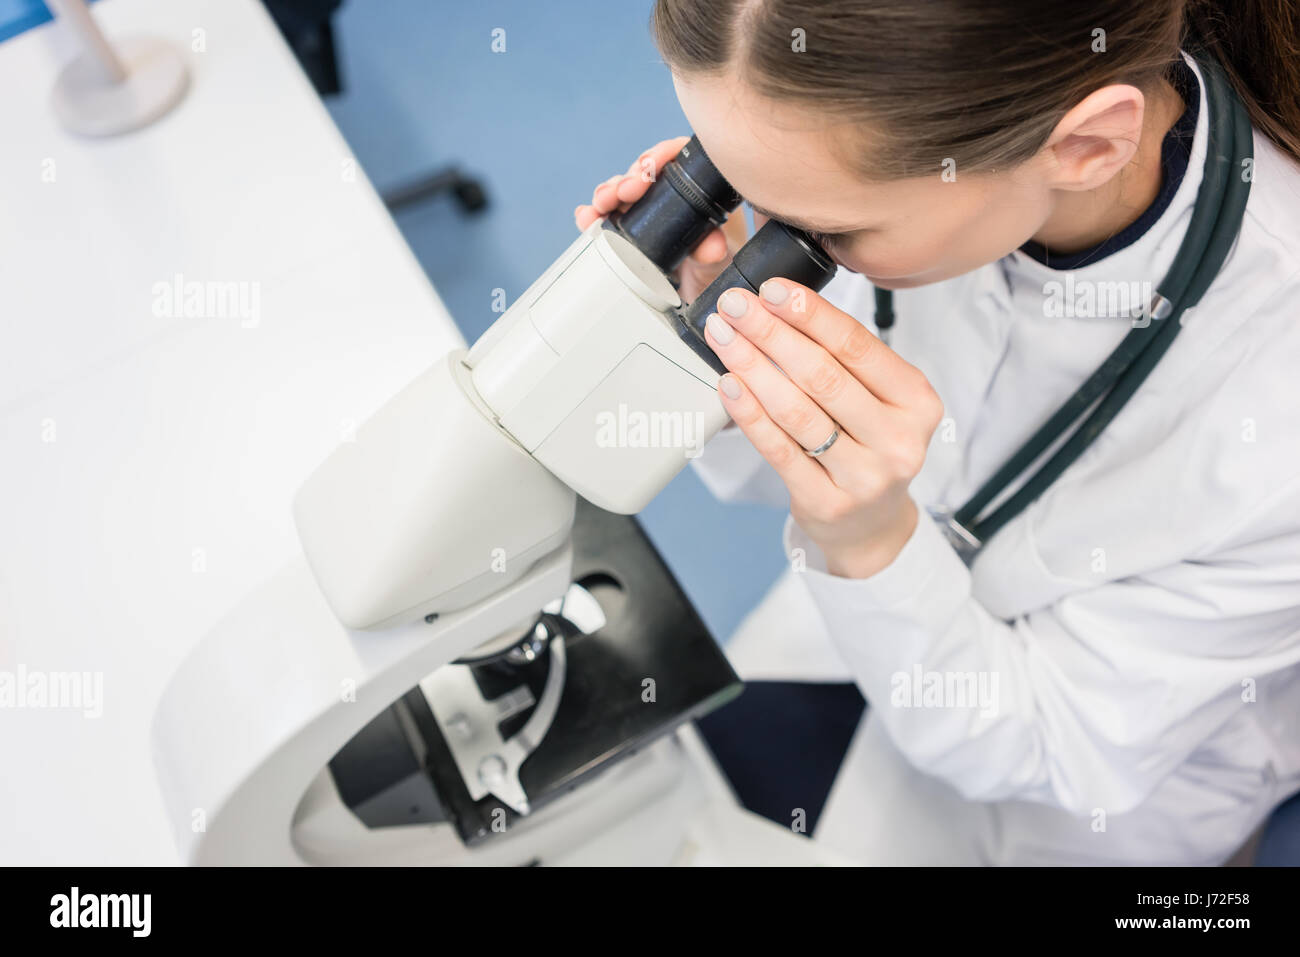 Doctor or biologist scrutinizing tissue under microscope Stock Photo